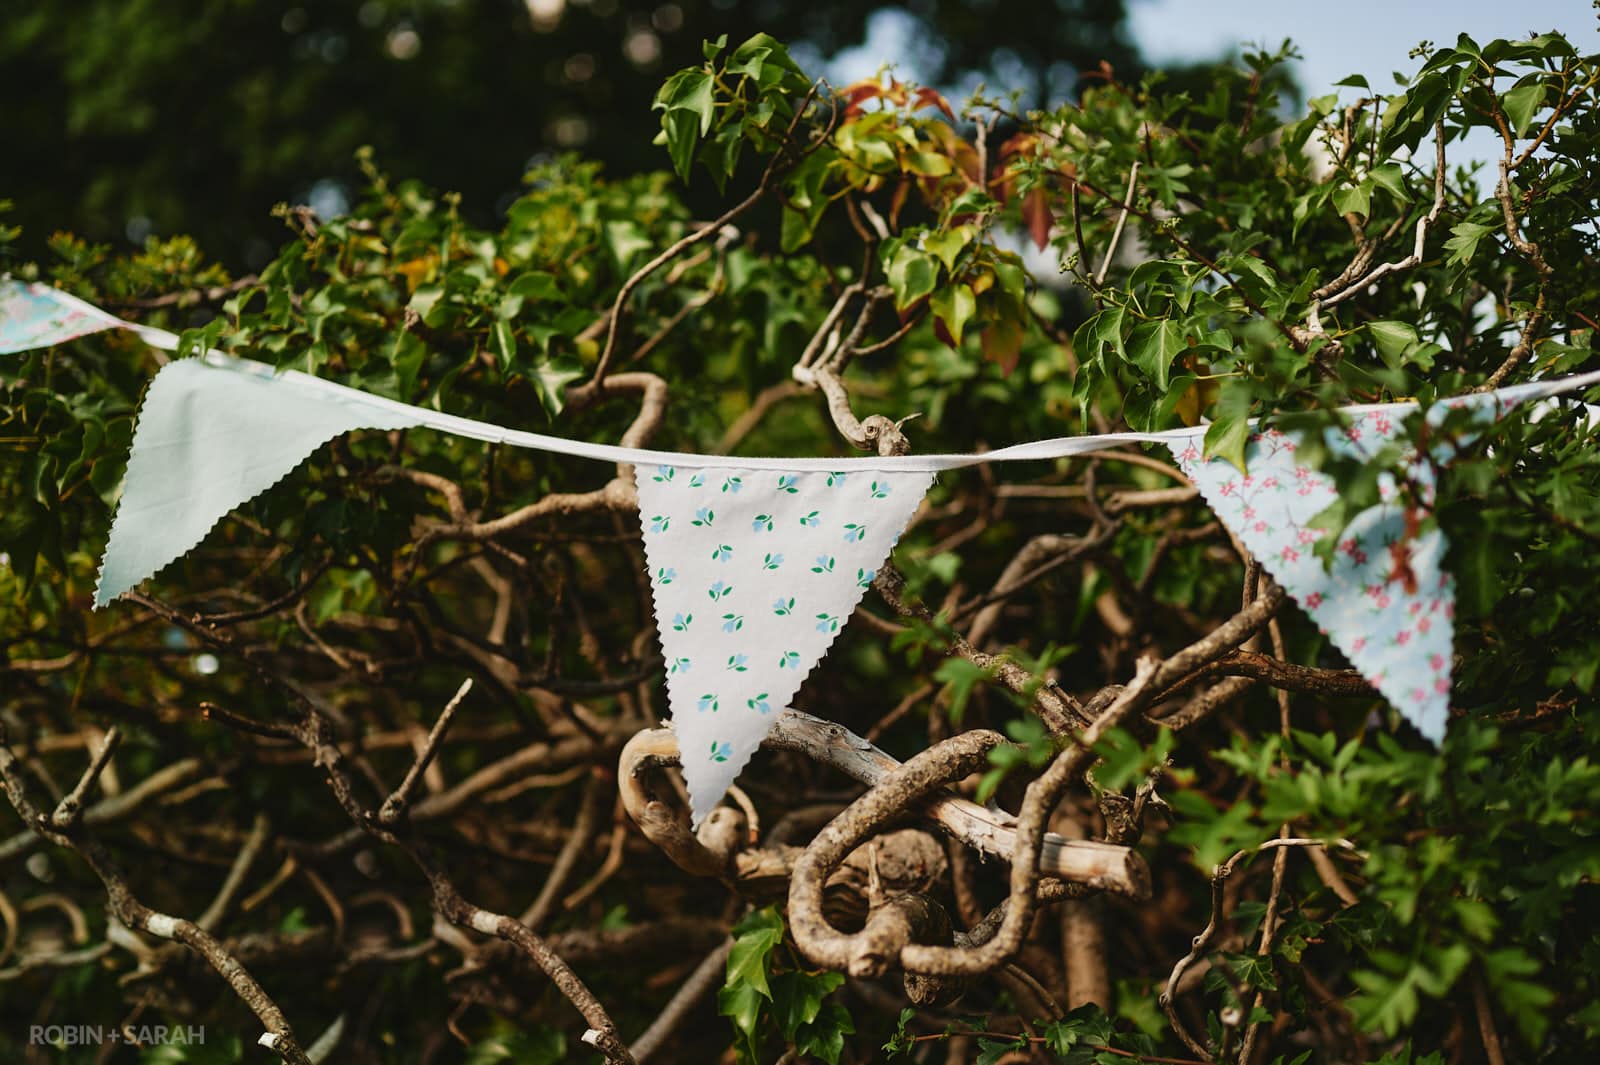 Bunting laid out on a hedgerow for wedding